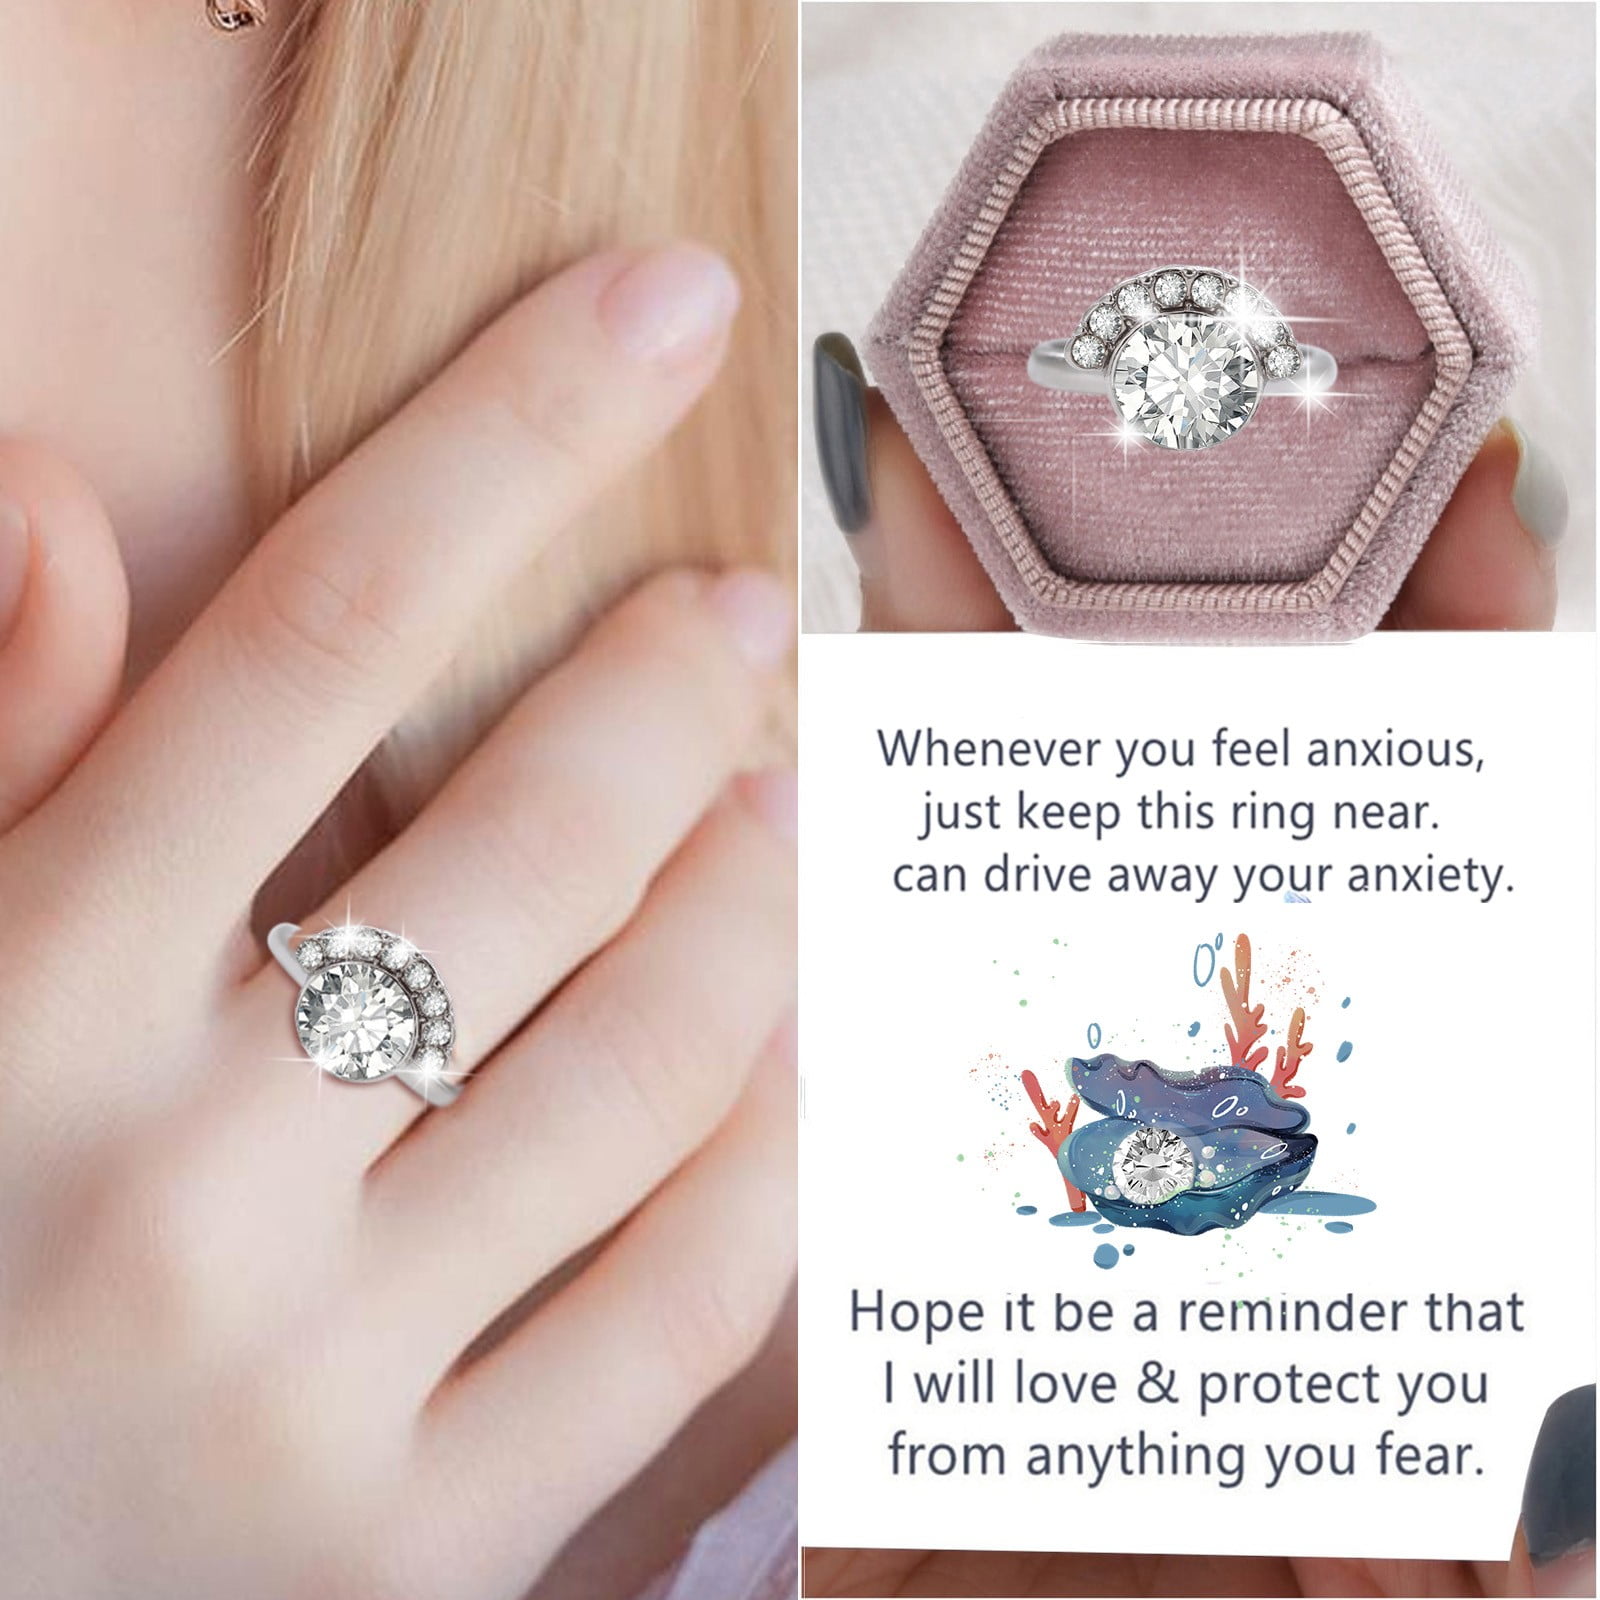 This New Site Is Like Pinterest for Engagement Rings - Brit + Co